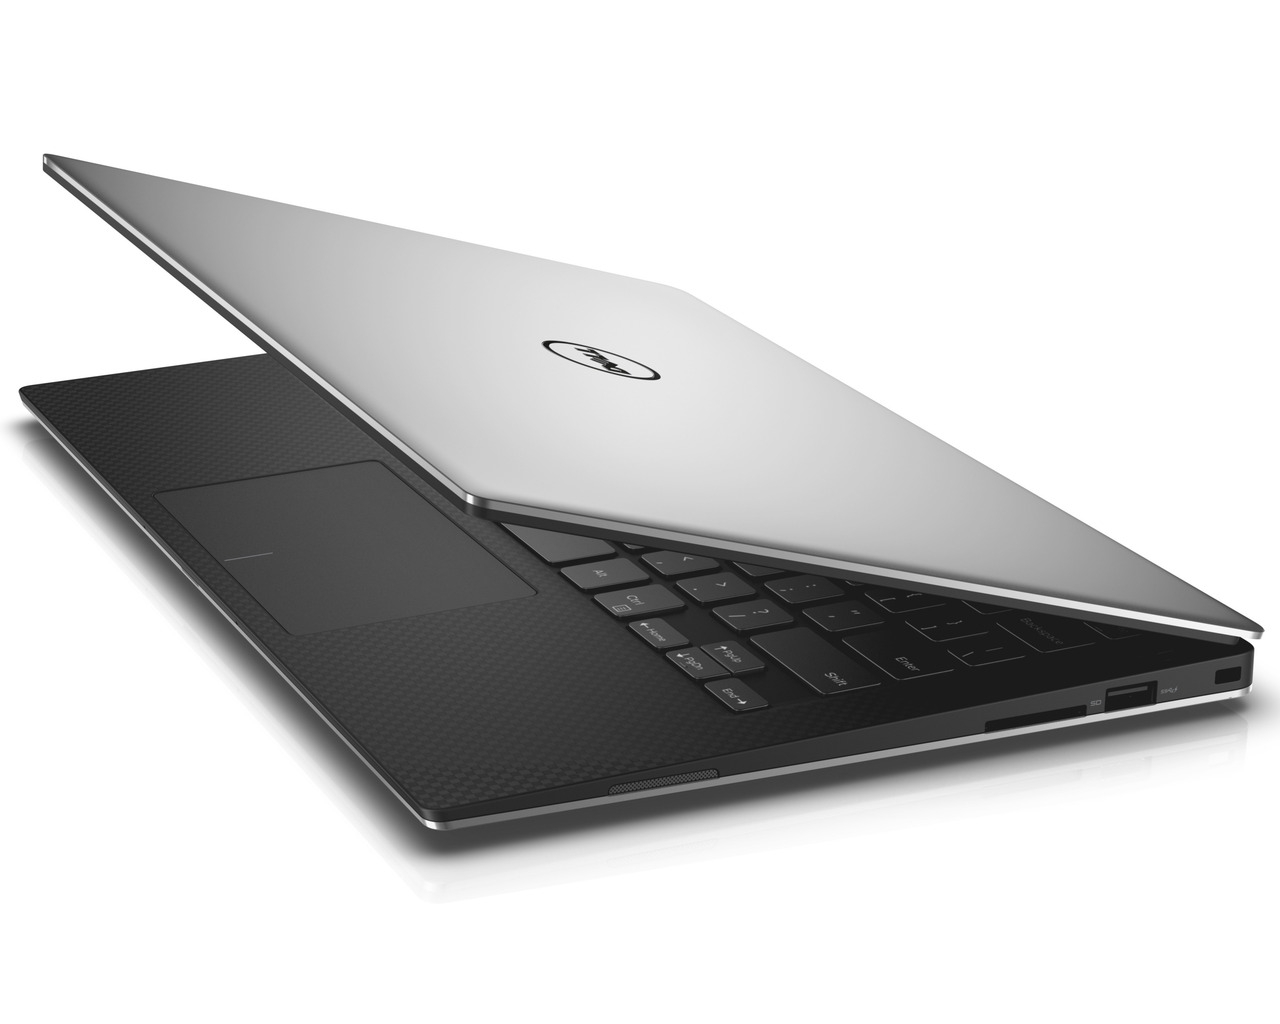 New Dell XPS 13 2015 for 1280 x 1024 resolution